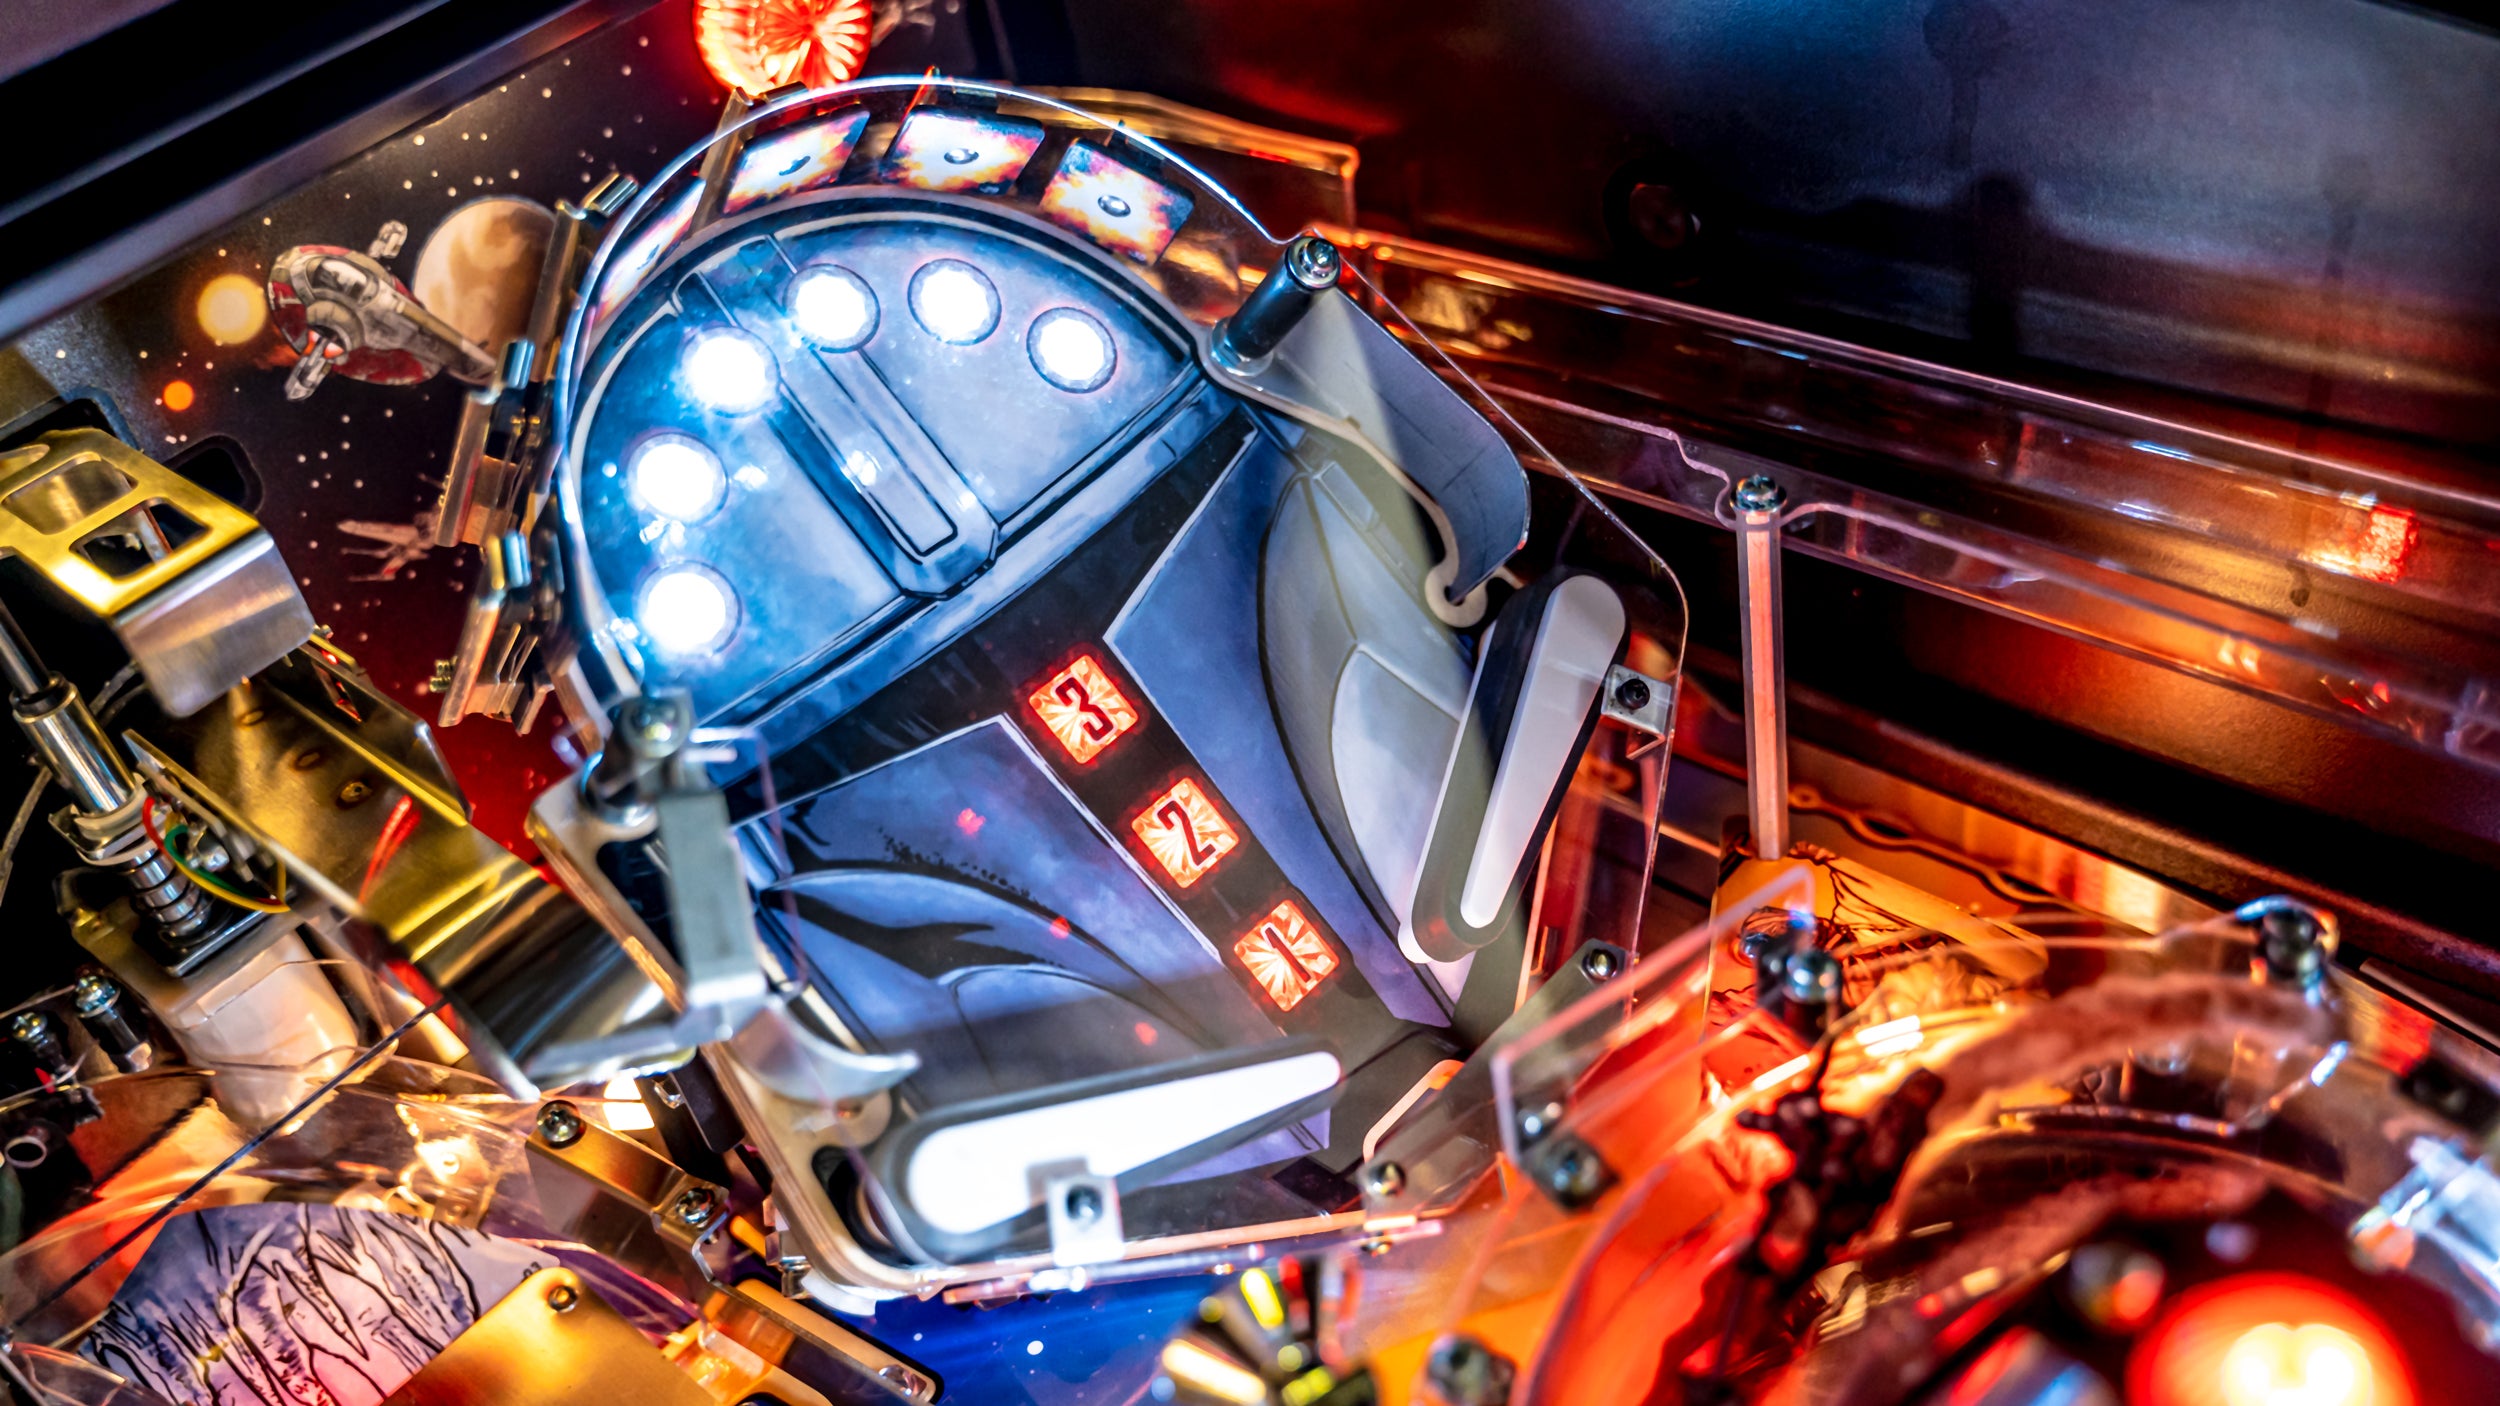 A secondary miniature playfield can be found in the upper corner of the table, which tilts up and down making it extra challenging to hit the light-up targets using the paddle flippers. (Image: Stern Pinball)